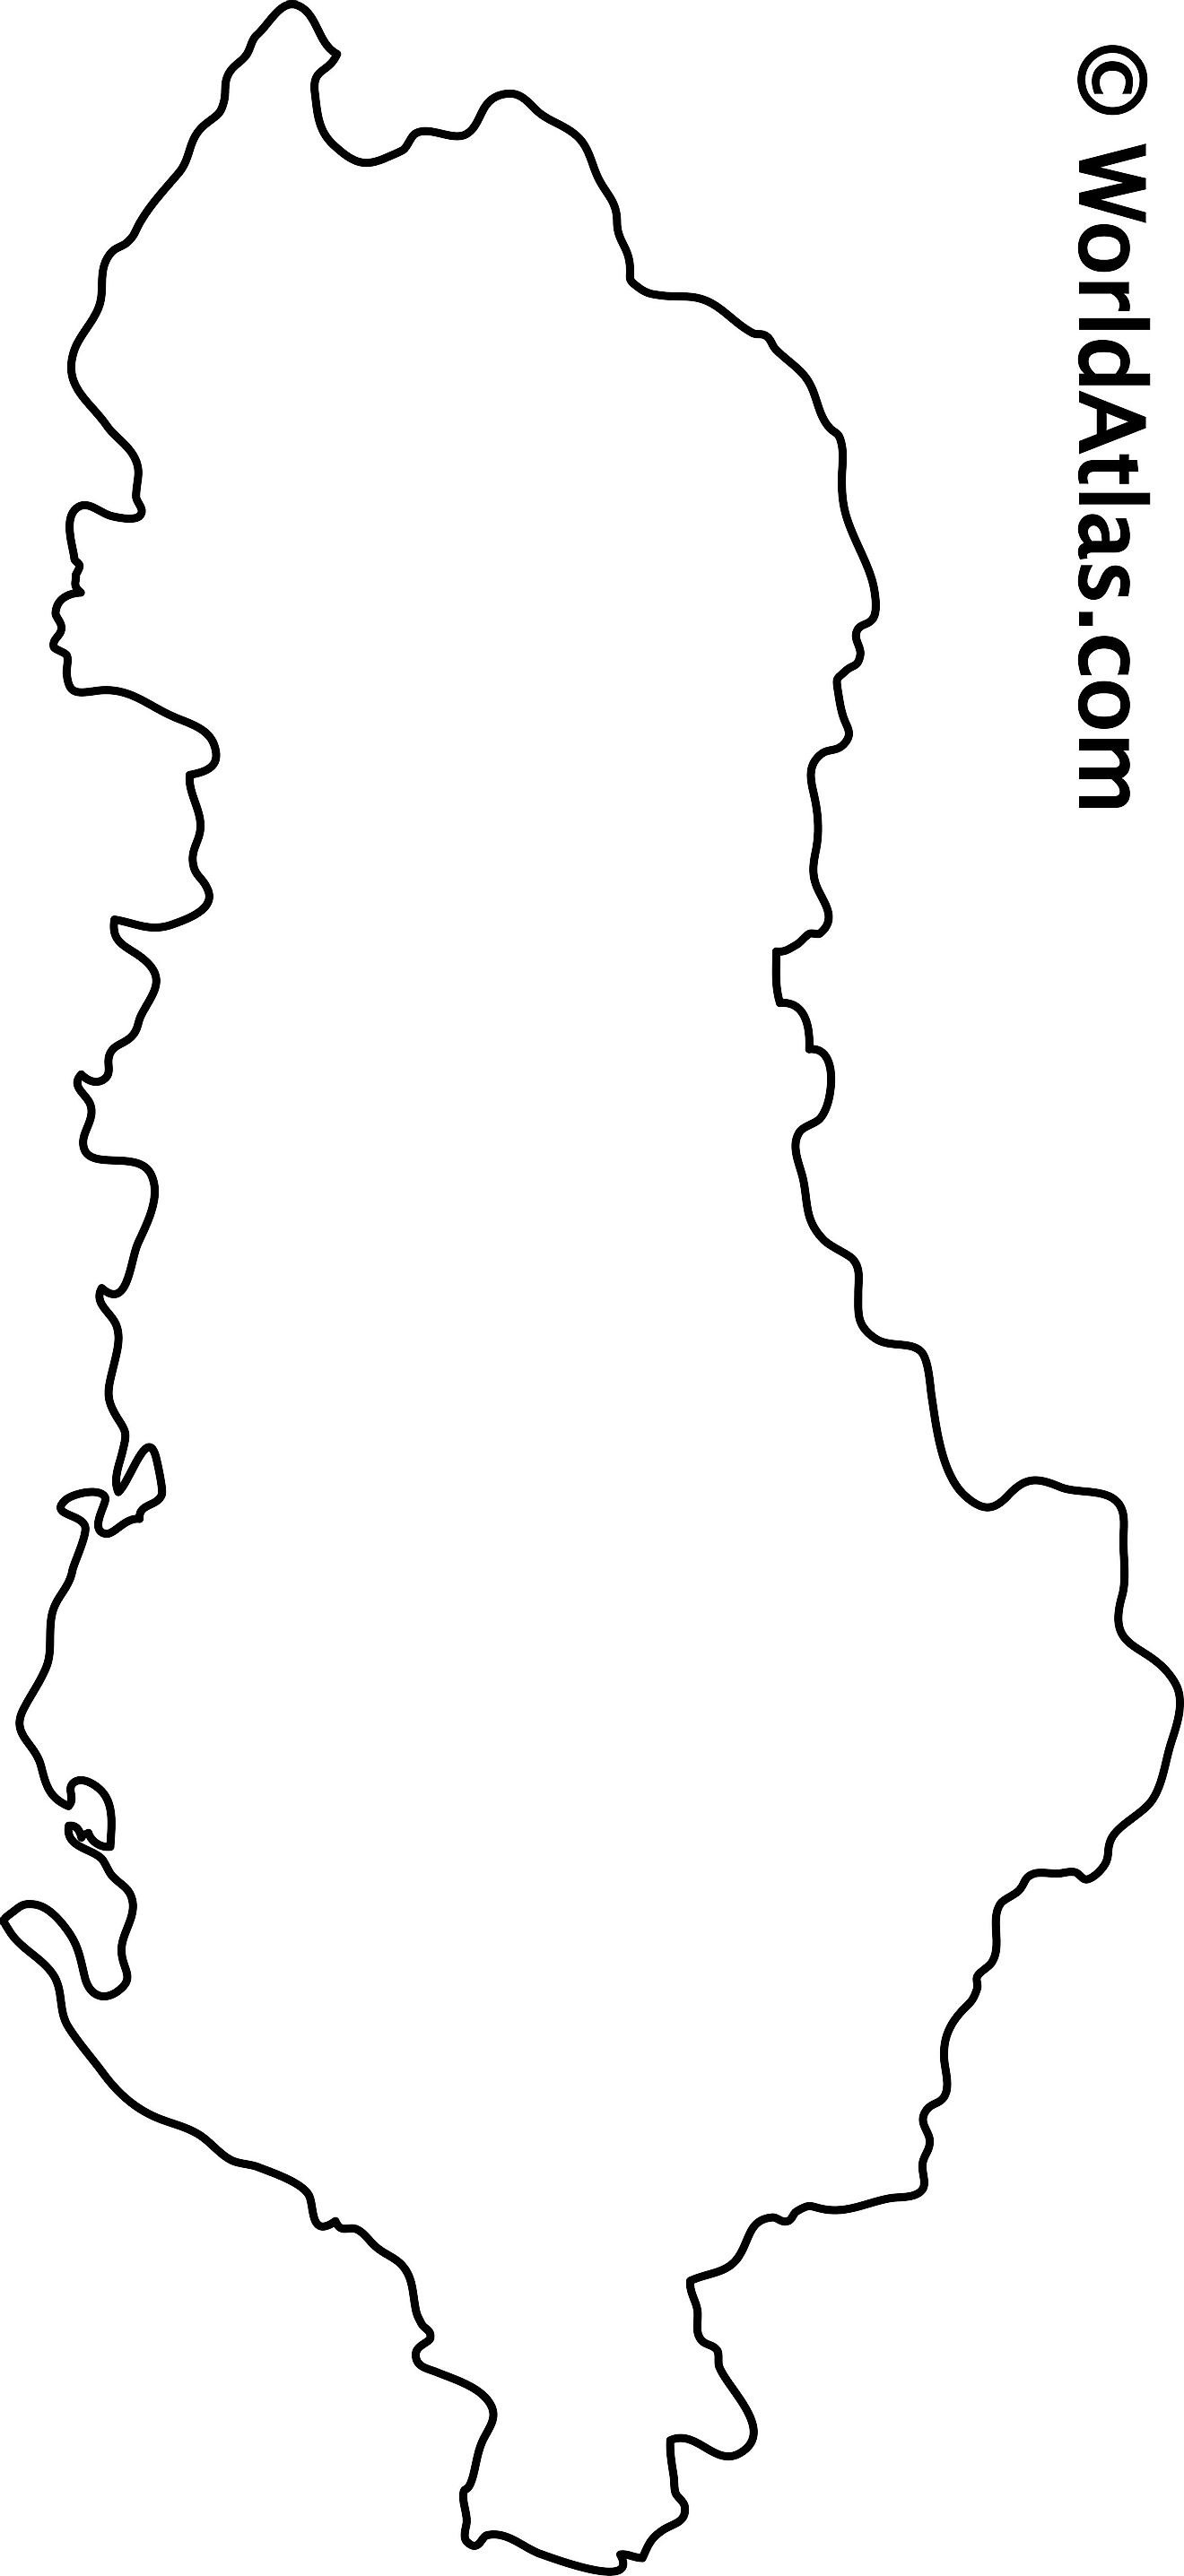 Blank outline map of Albania